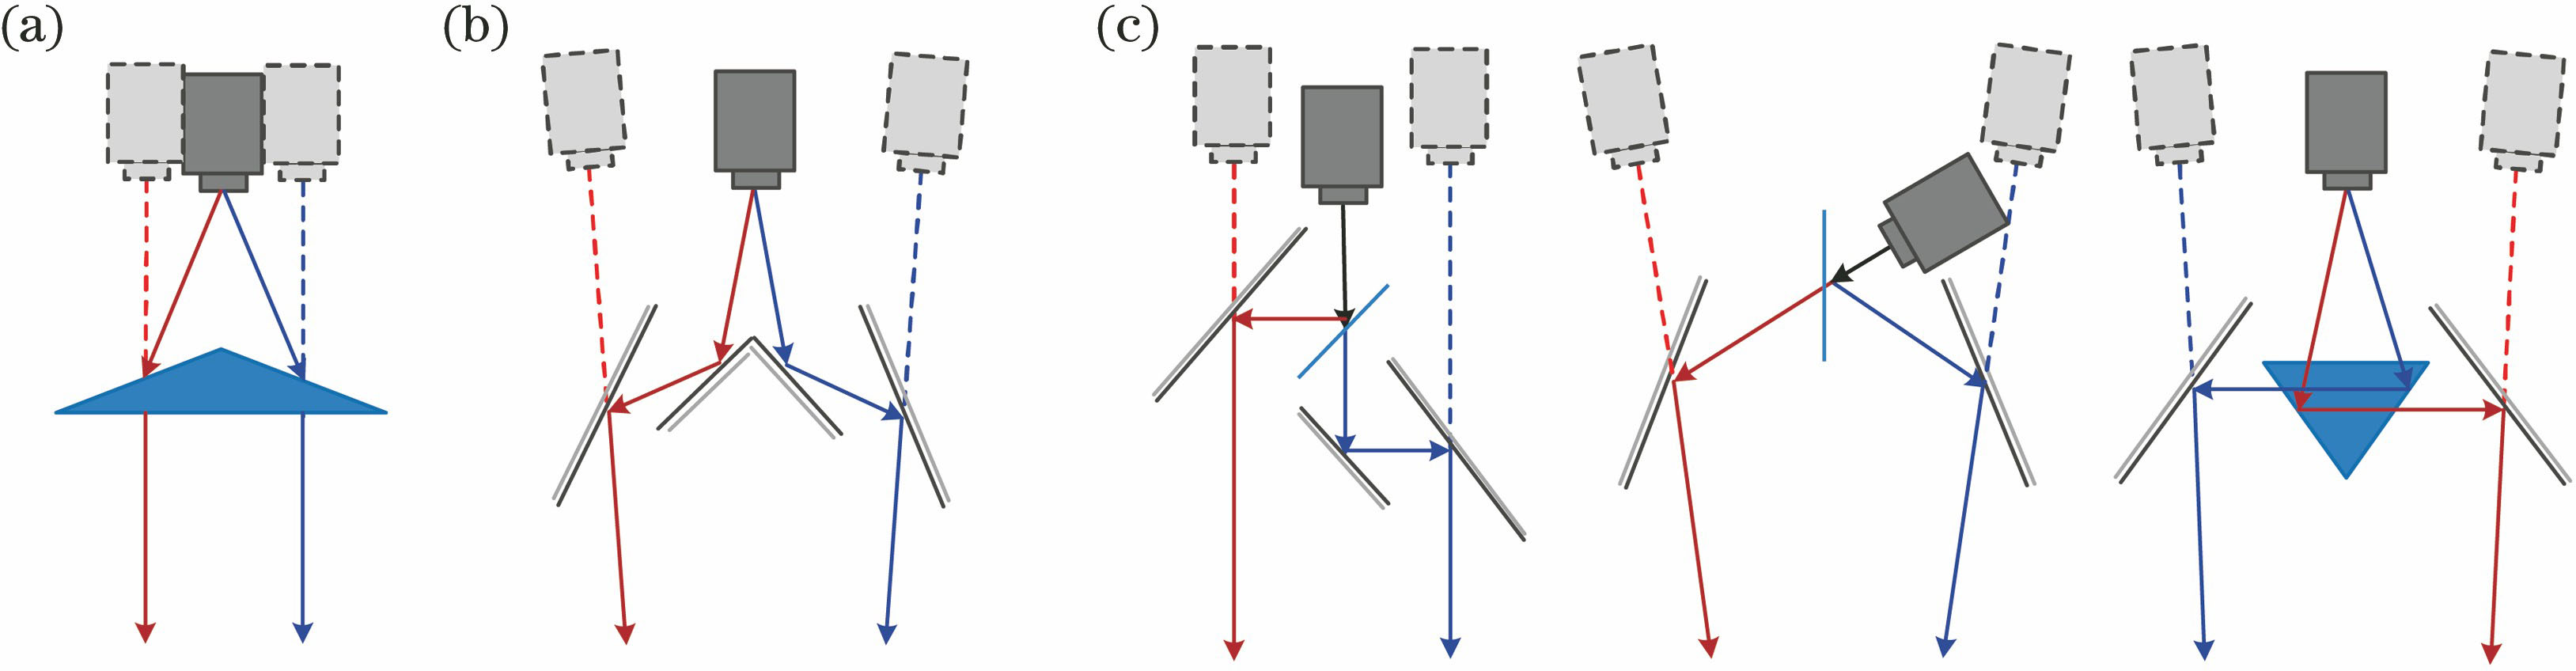 Structure of catadioptric symmetry plane mirror binocular vision system. (a) Single camera and a biprism; (b) single camera and a group of plane mirrors; (c) from left to right, spectroscope, dichroic filters, prism with plane mirrors, respectively